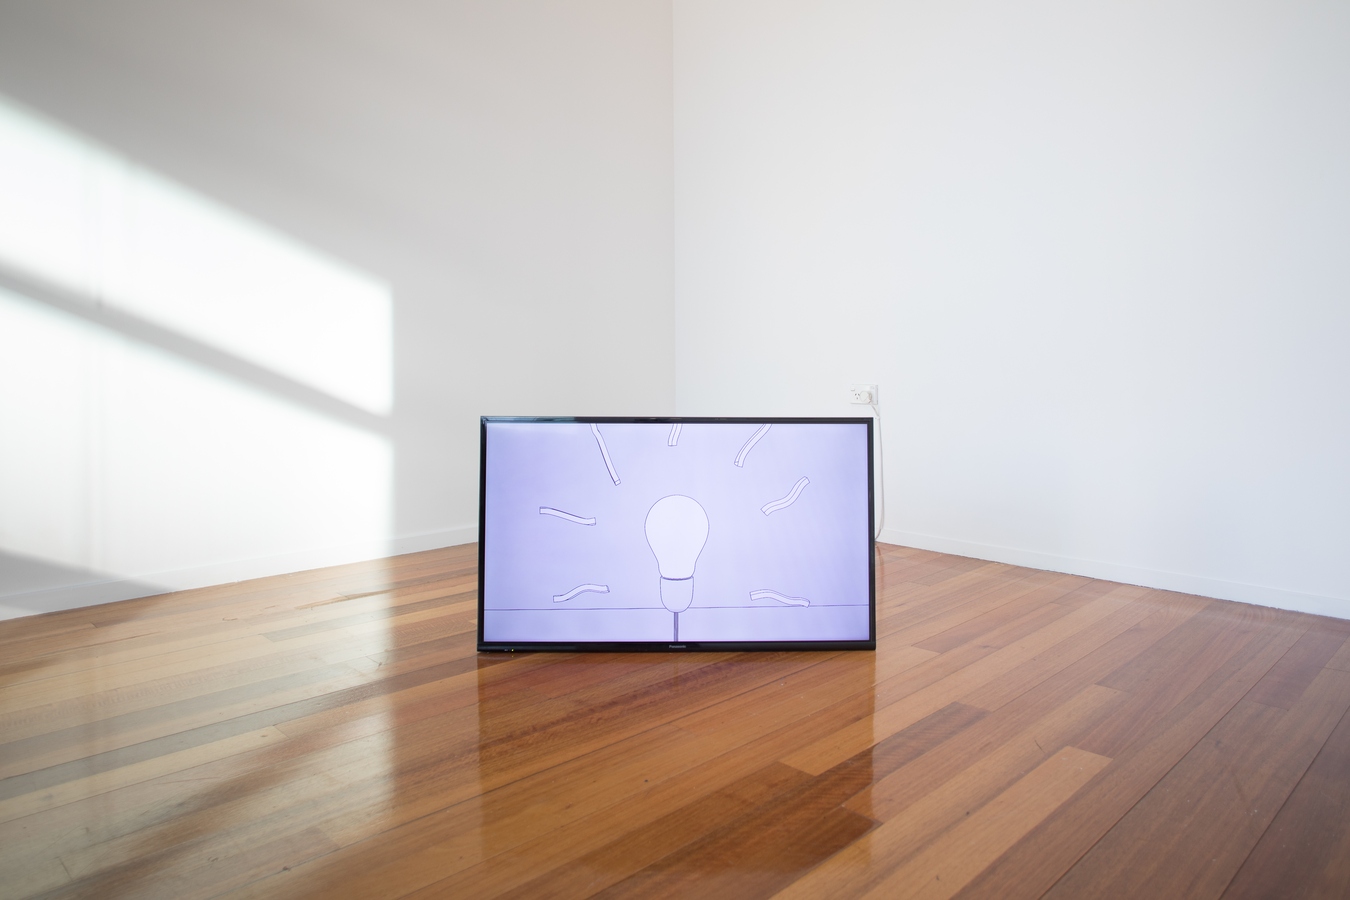 Image: Joshua Harris-Harding, Where it goes (exhibition view), 2019, single channel video, 7:00 min. Photo: Janneth Gil.